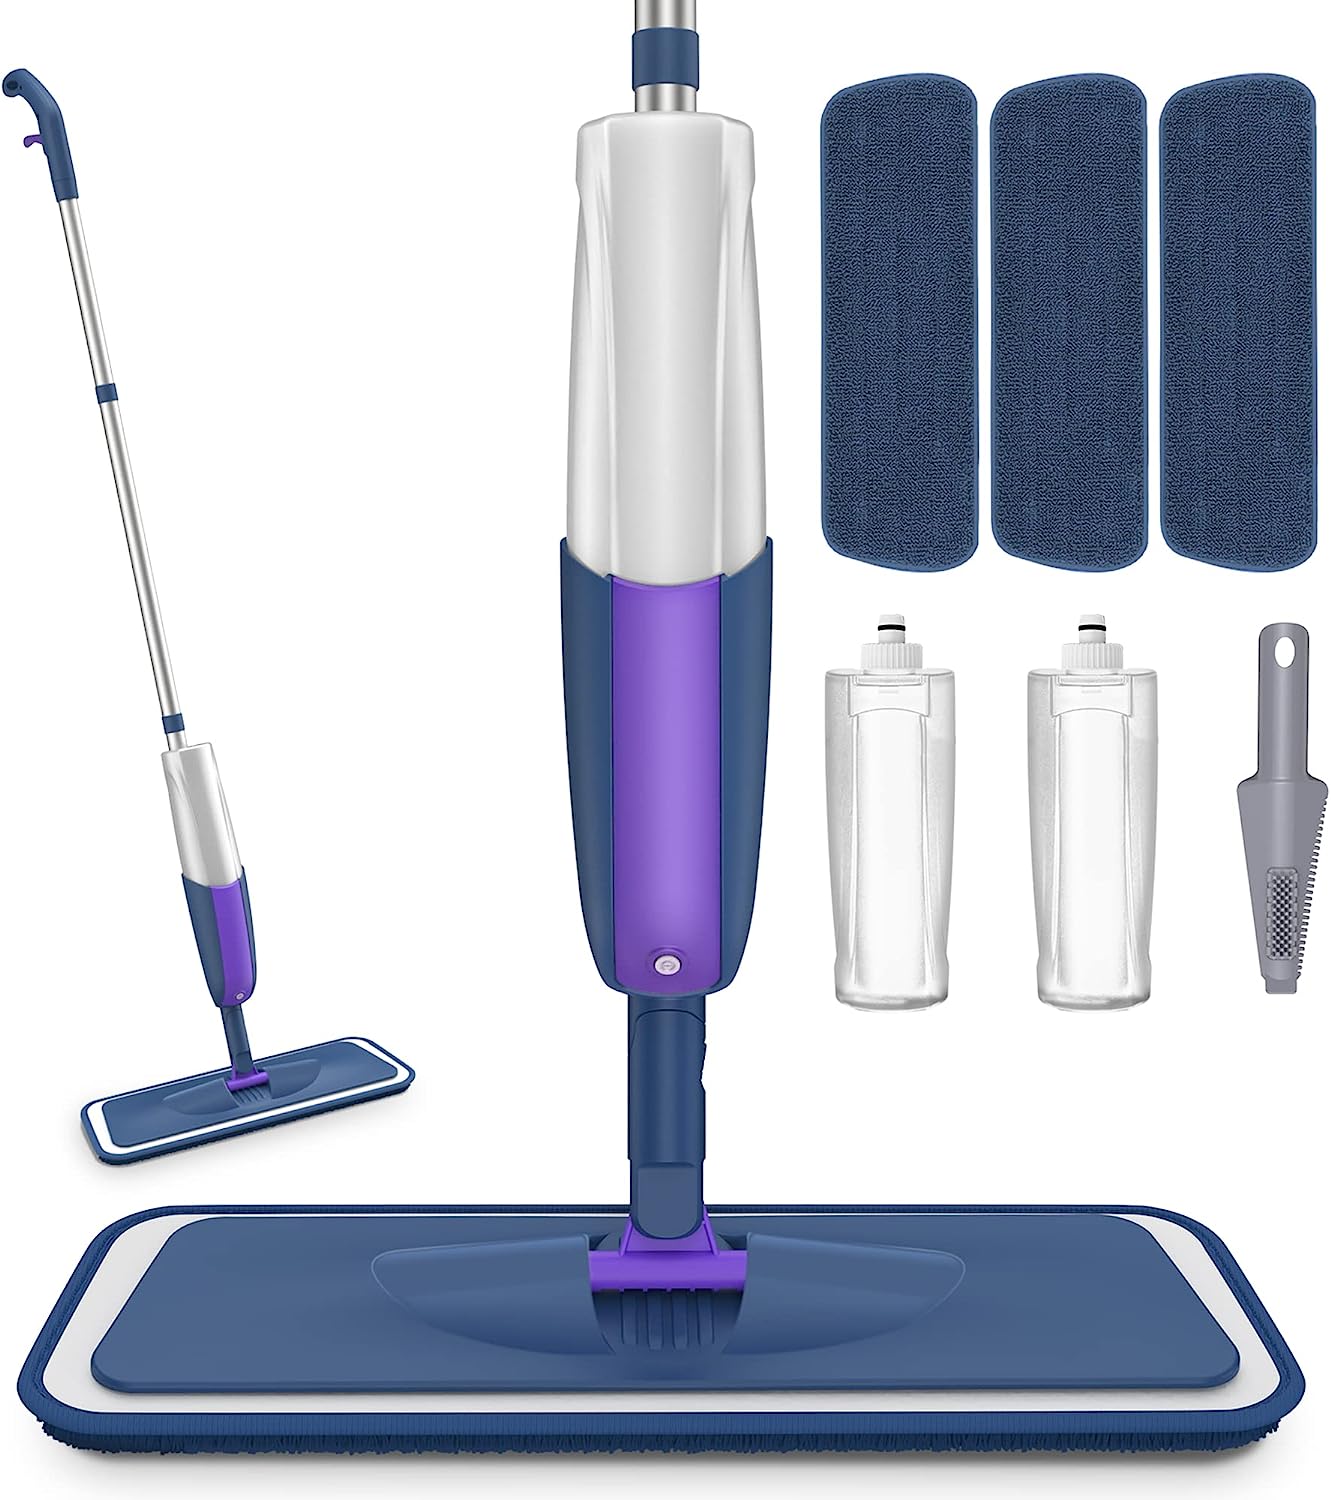 Wet Mops for Floor Cleaning- MEXERRIS Spray Mop with [...]